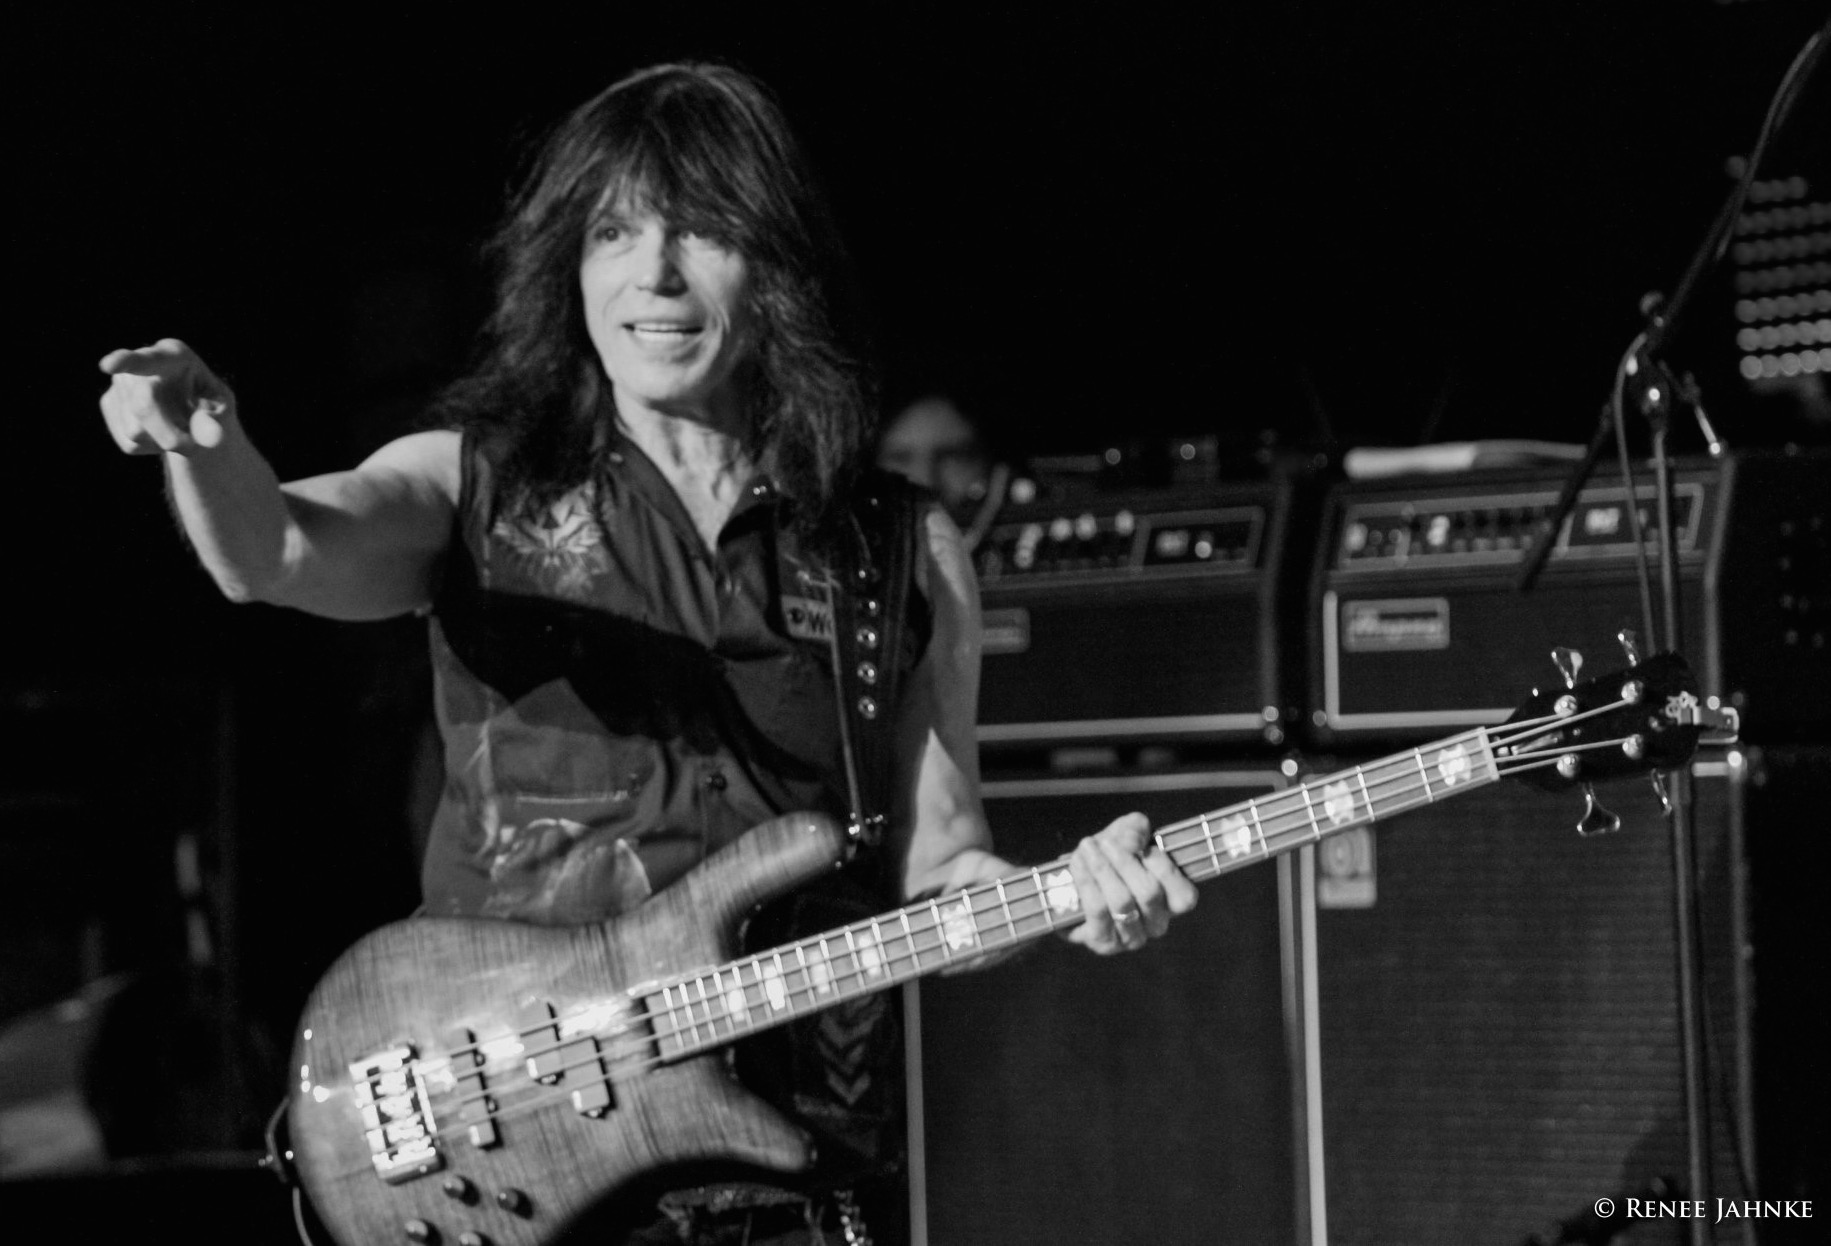 Rudy Sarzo holding a bass on stage pointing to the audience